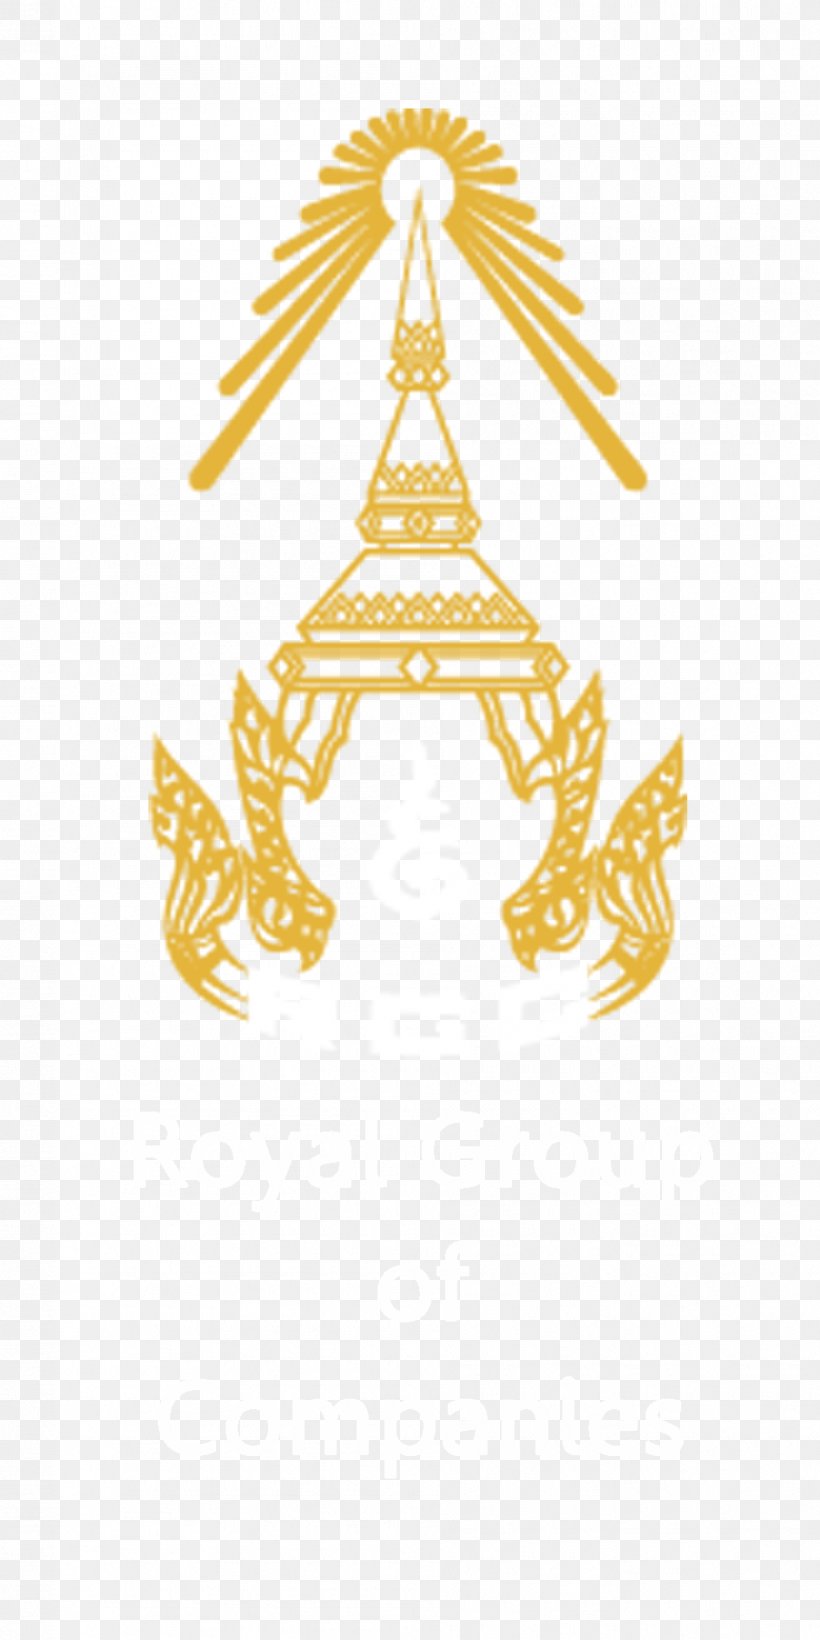 Cambodia The Royal Group Company Logo Conglomerate, PNG, 945x1890px, Cambodia, Company, Conglomerate, Economic Sector, Family Download Free